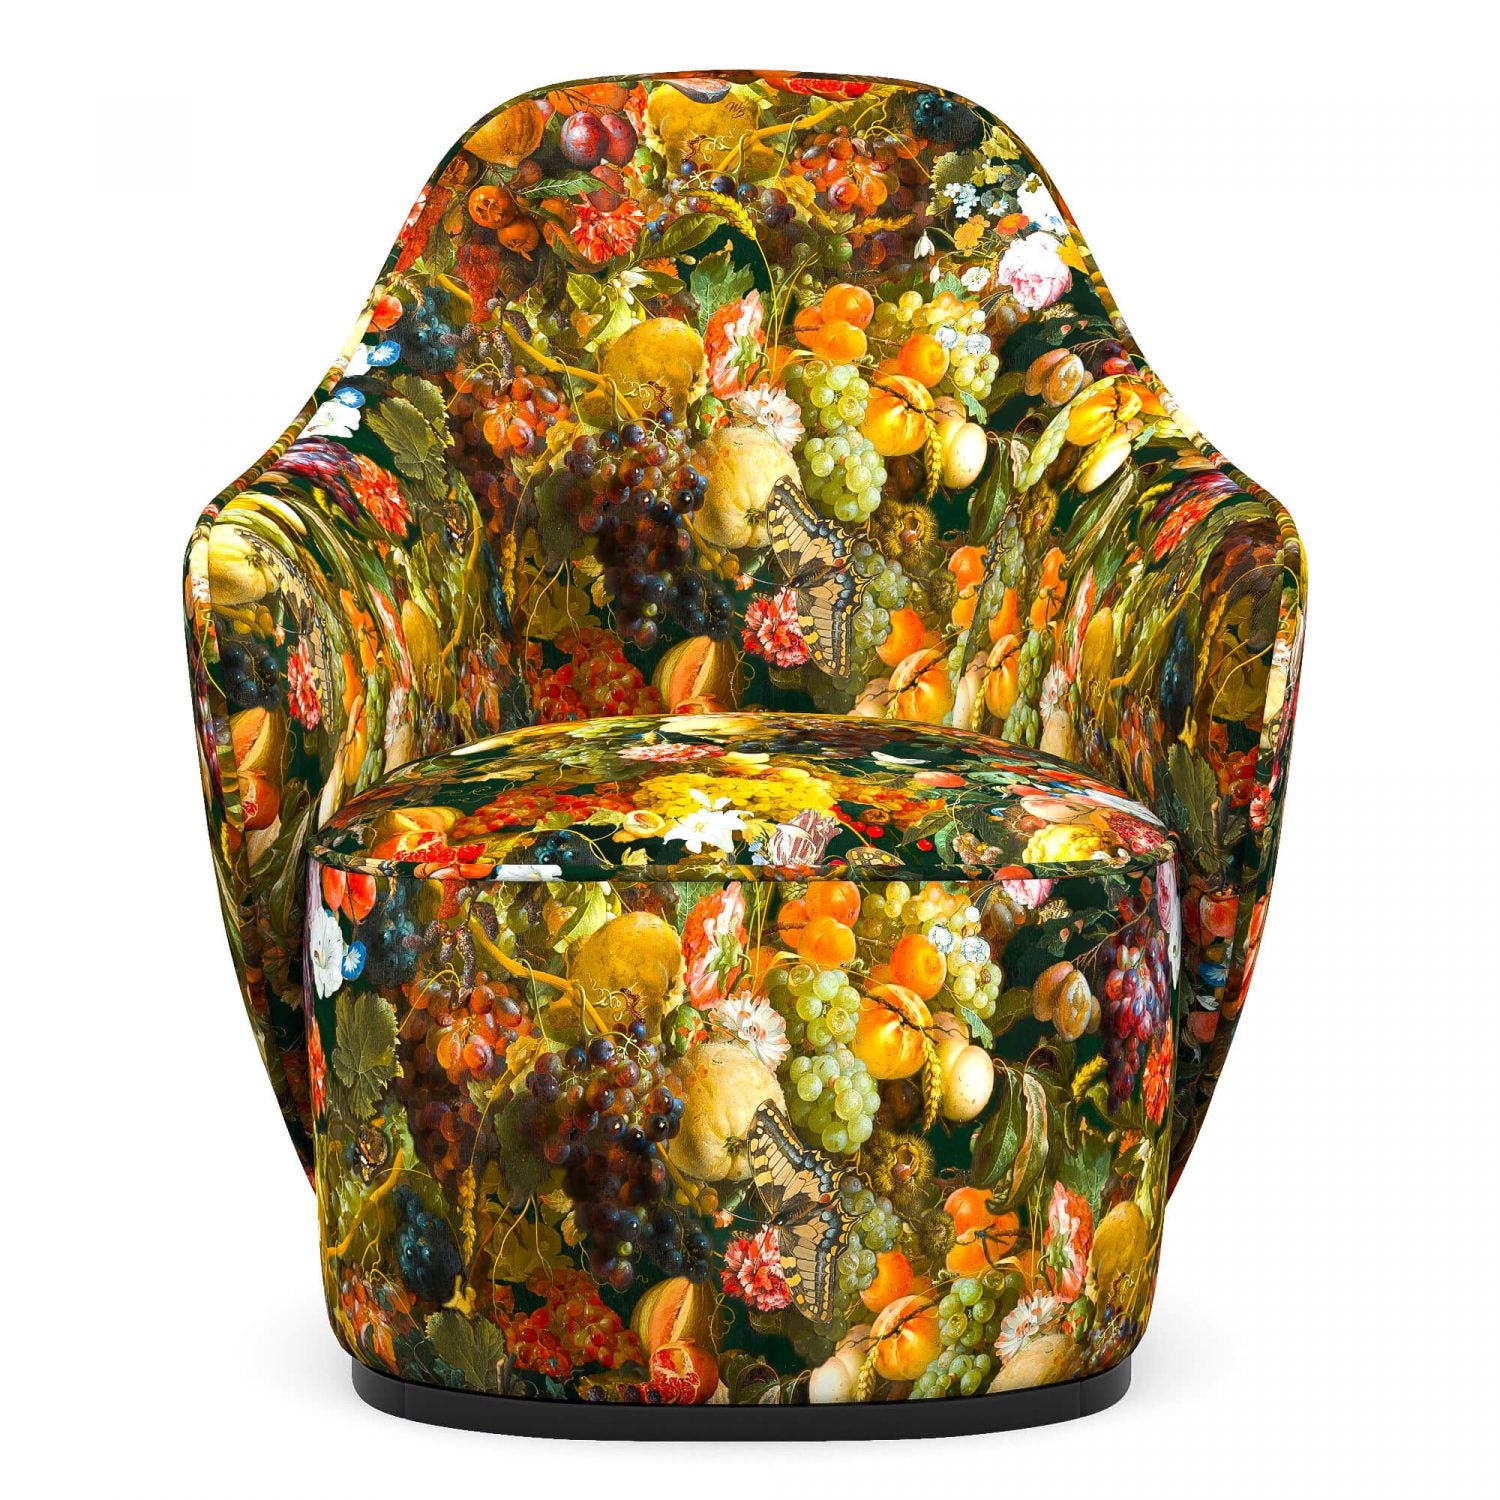 Garland of fruits and flowers hug armchair